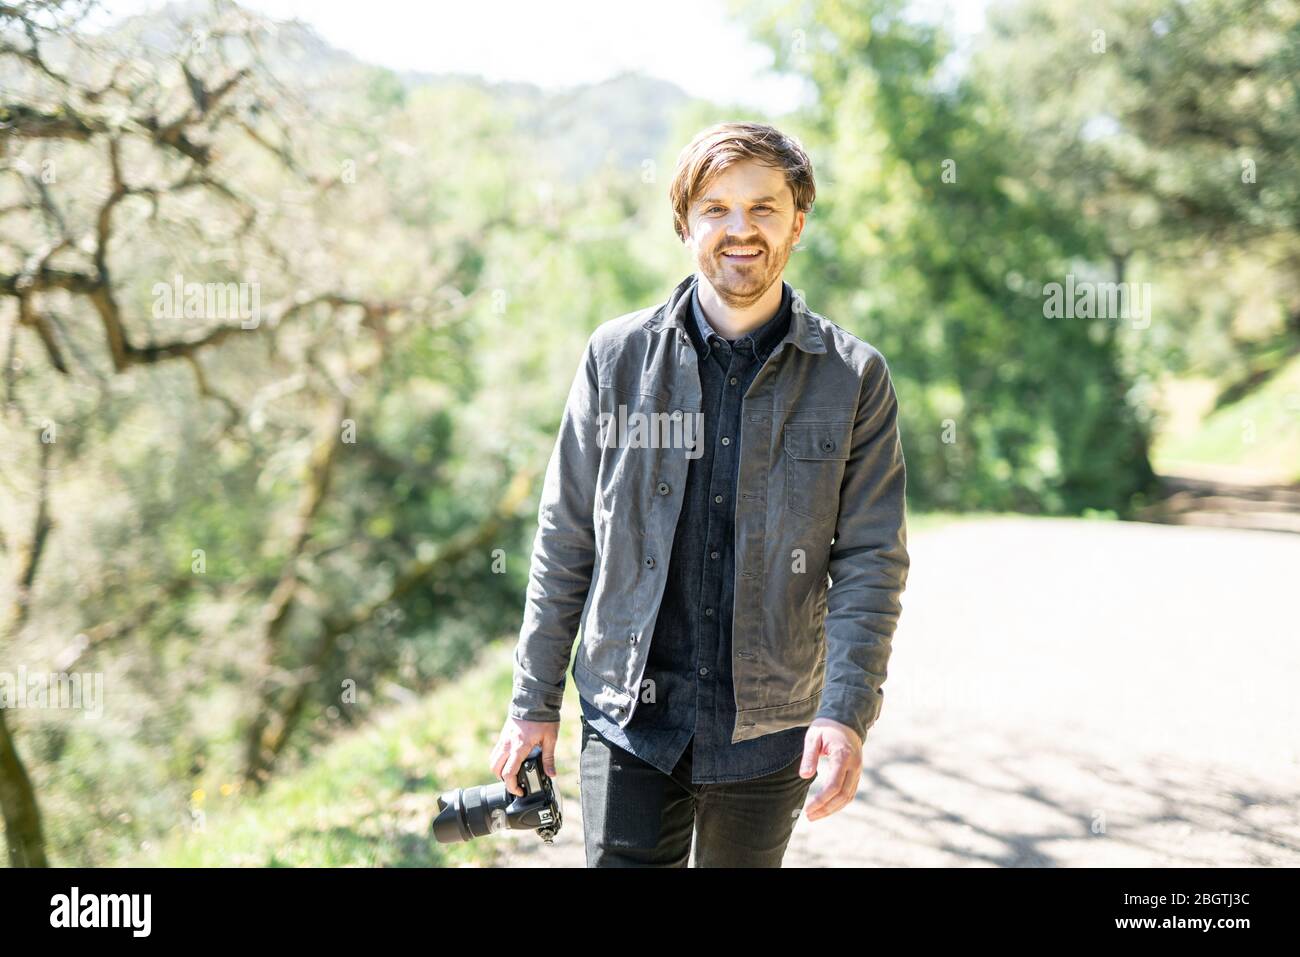 Portrait of young person smiling while walking on trail holding camera Stock Photo